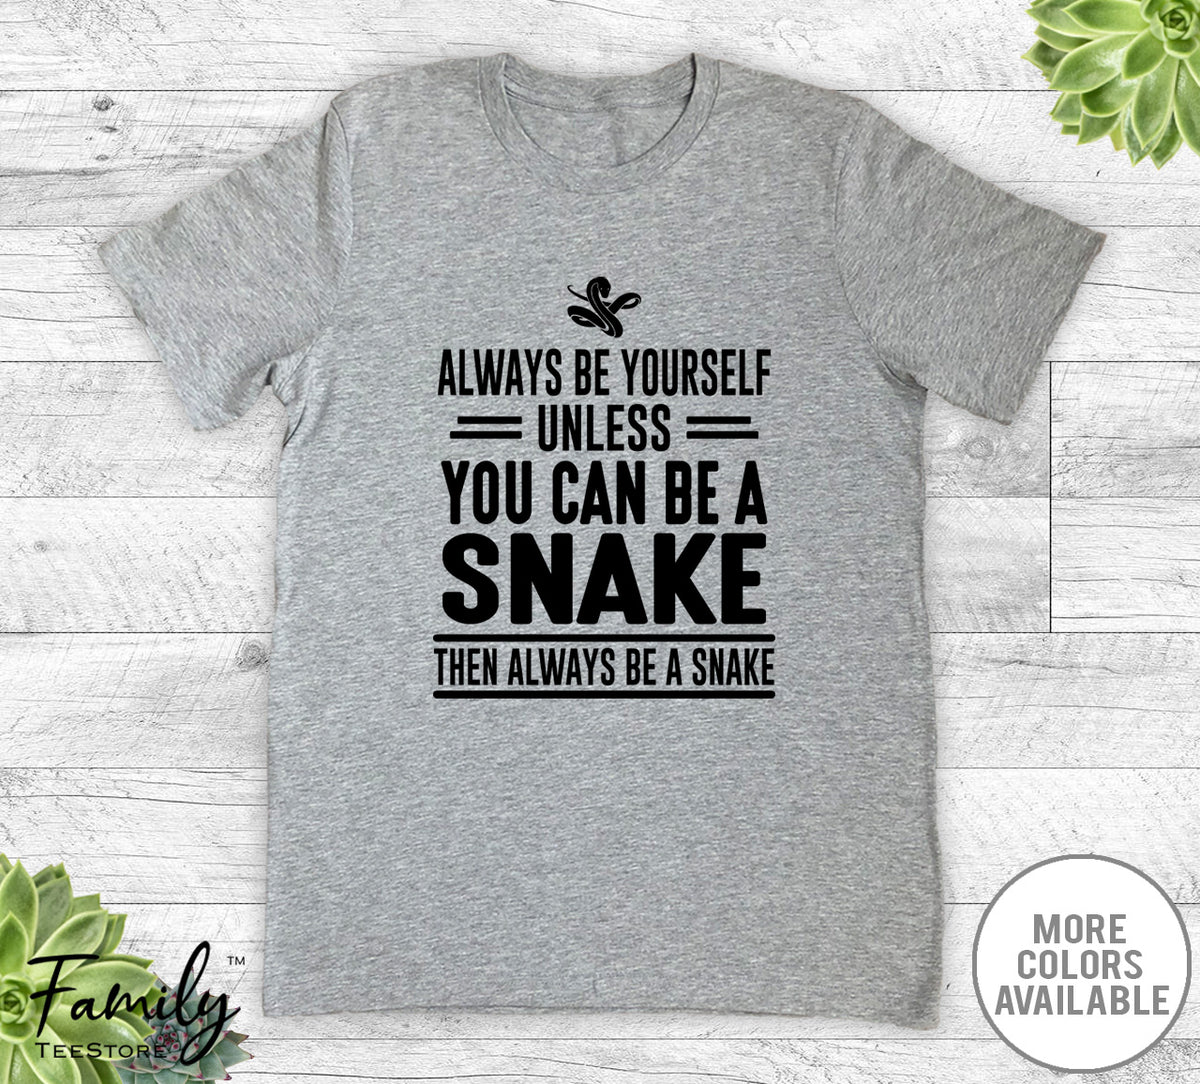 Always Be Yourself Unless You Can Be A Snake - Unisex T-shirt - Snake Shirt - Snake Gift - familyteeprints